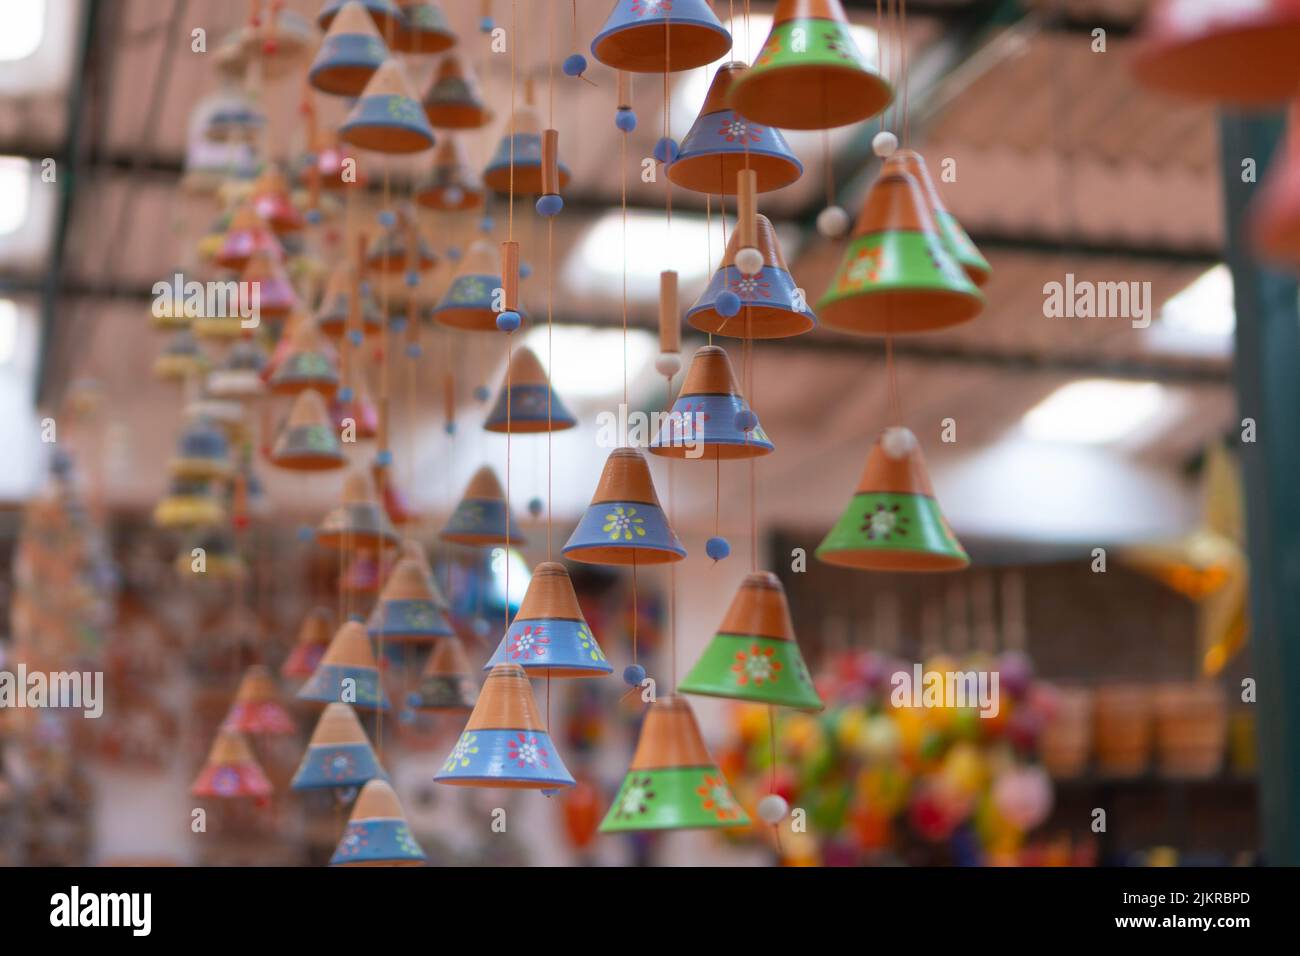 Decorative clay bells in a souvenir store. Handmade clay products. Ráquira, Colombia. Stock Photo